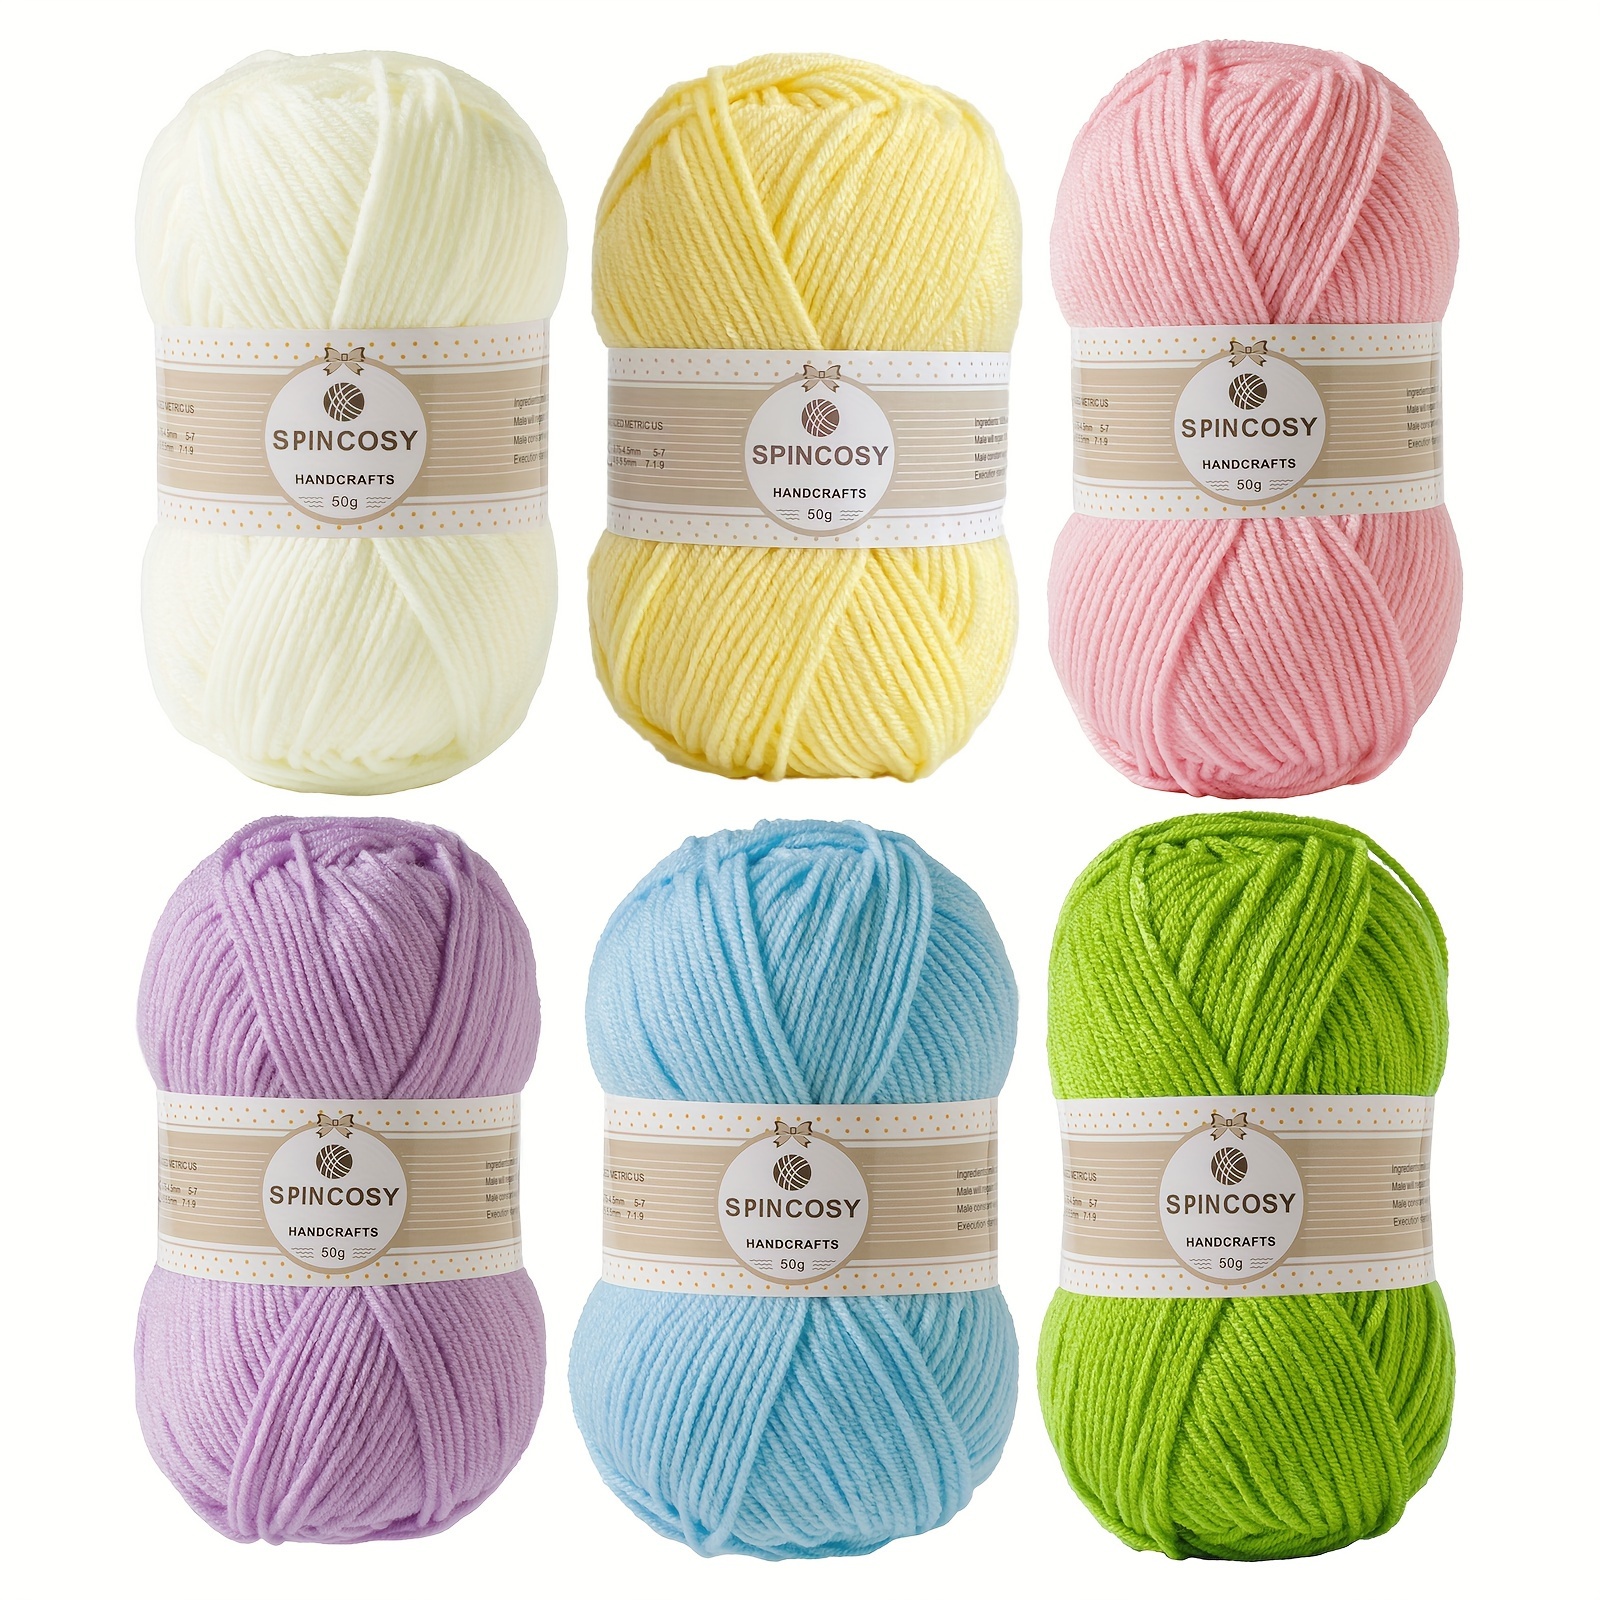  1PCS 100g Beginners White Yarn for Crocheting and